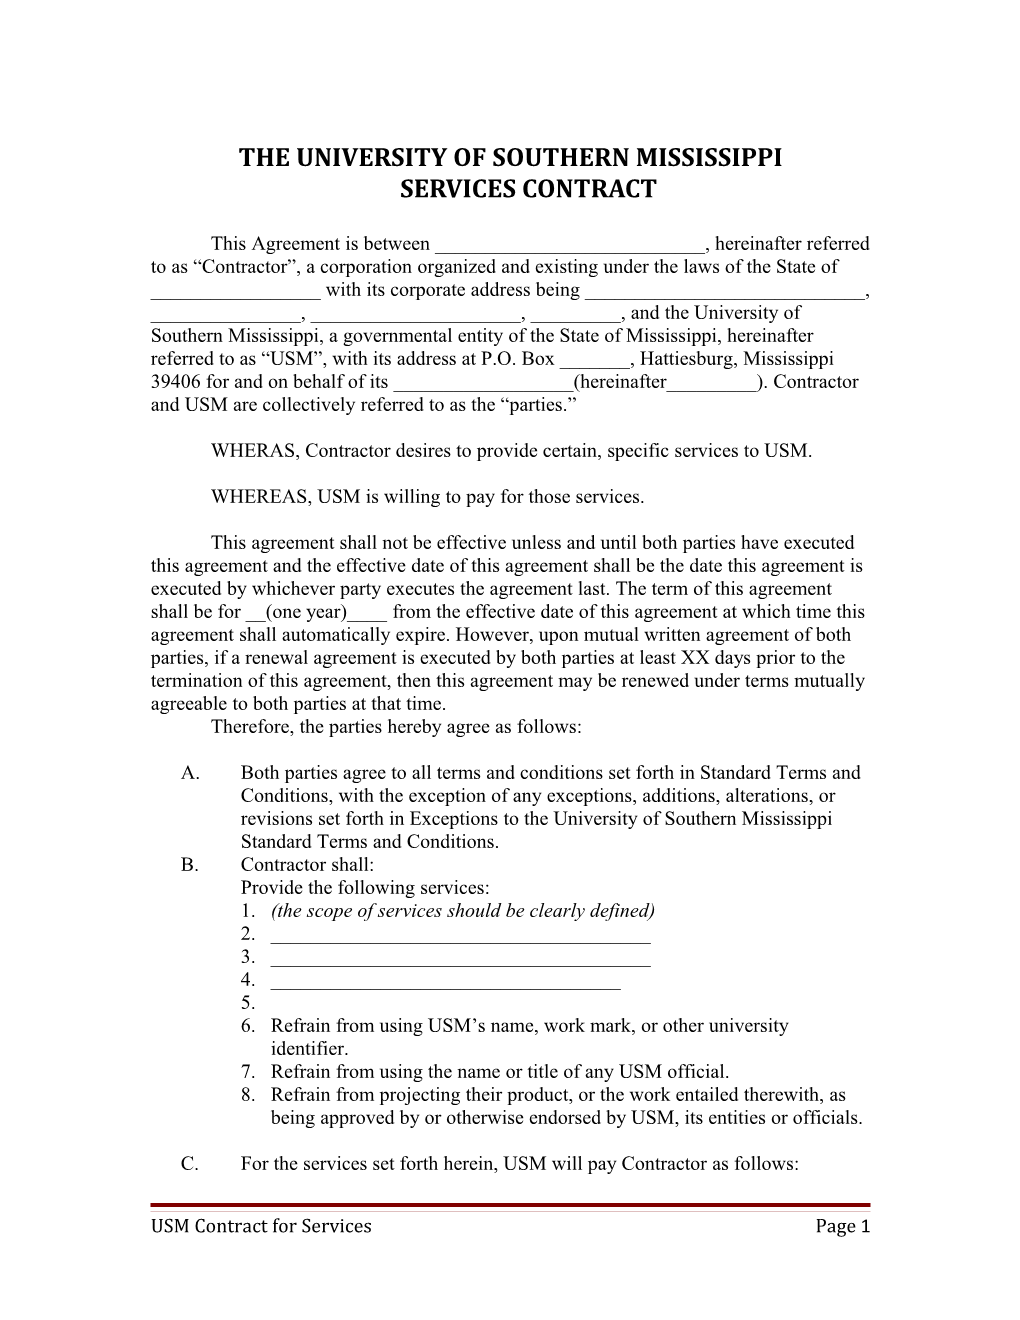 Contract for the University of Southern Mississippi